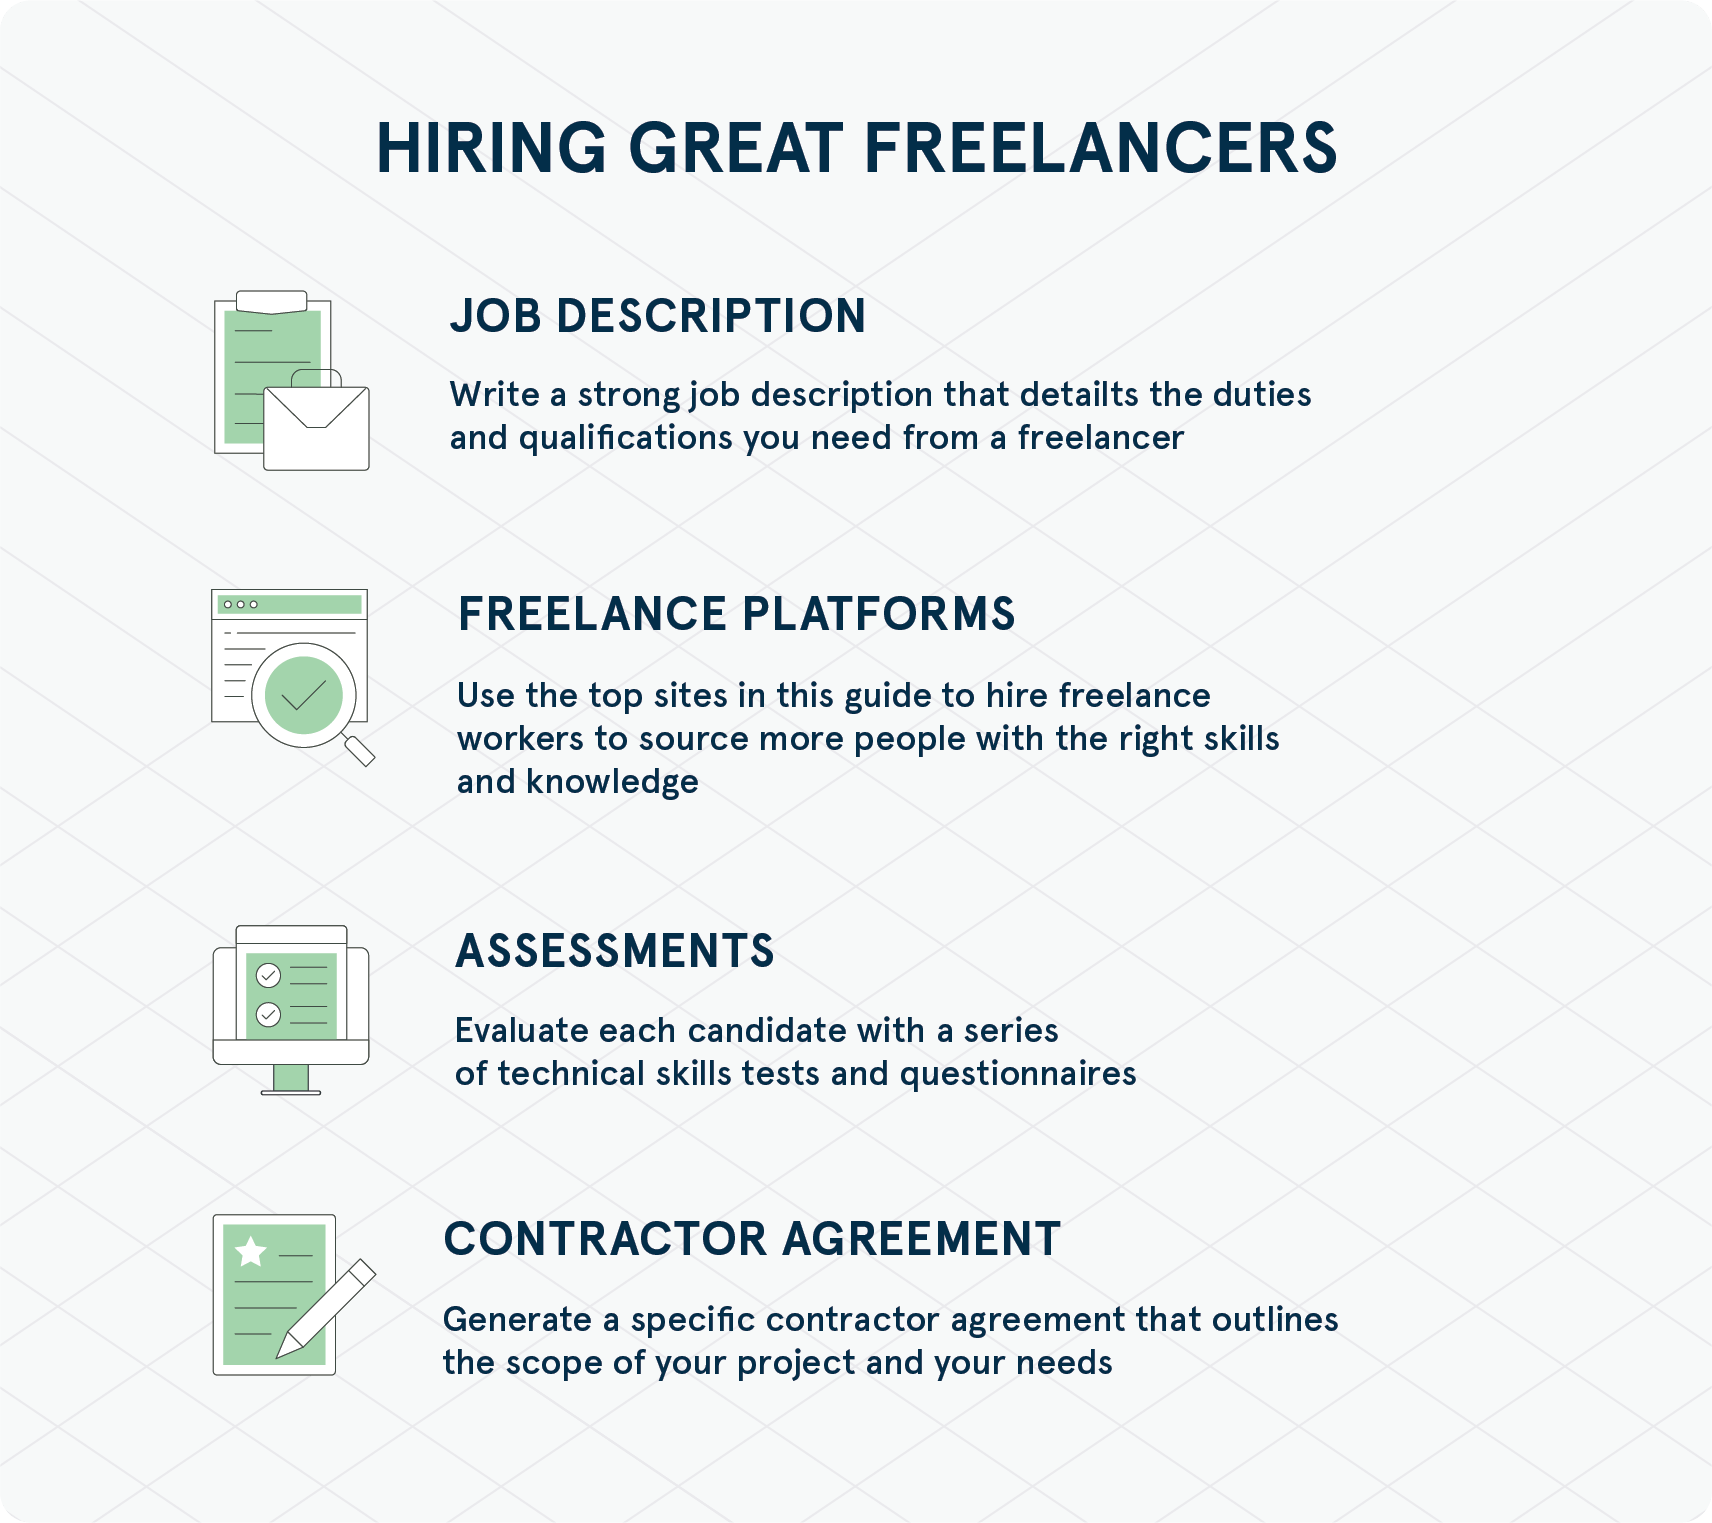 Benefits of hiring freelance startup consultants